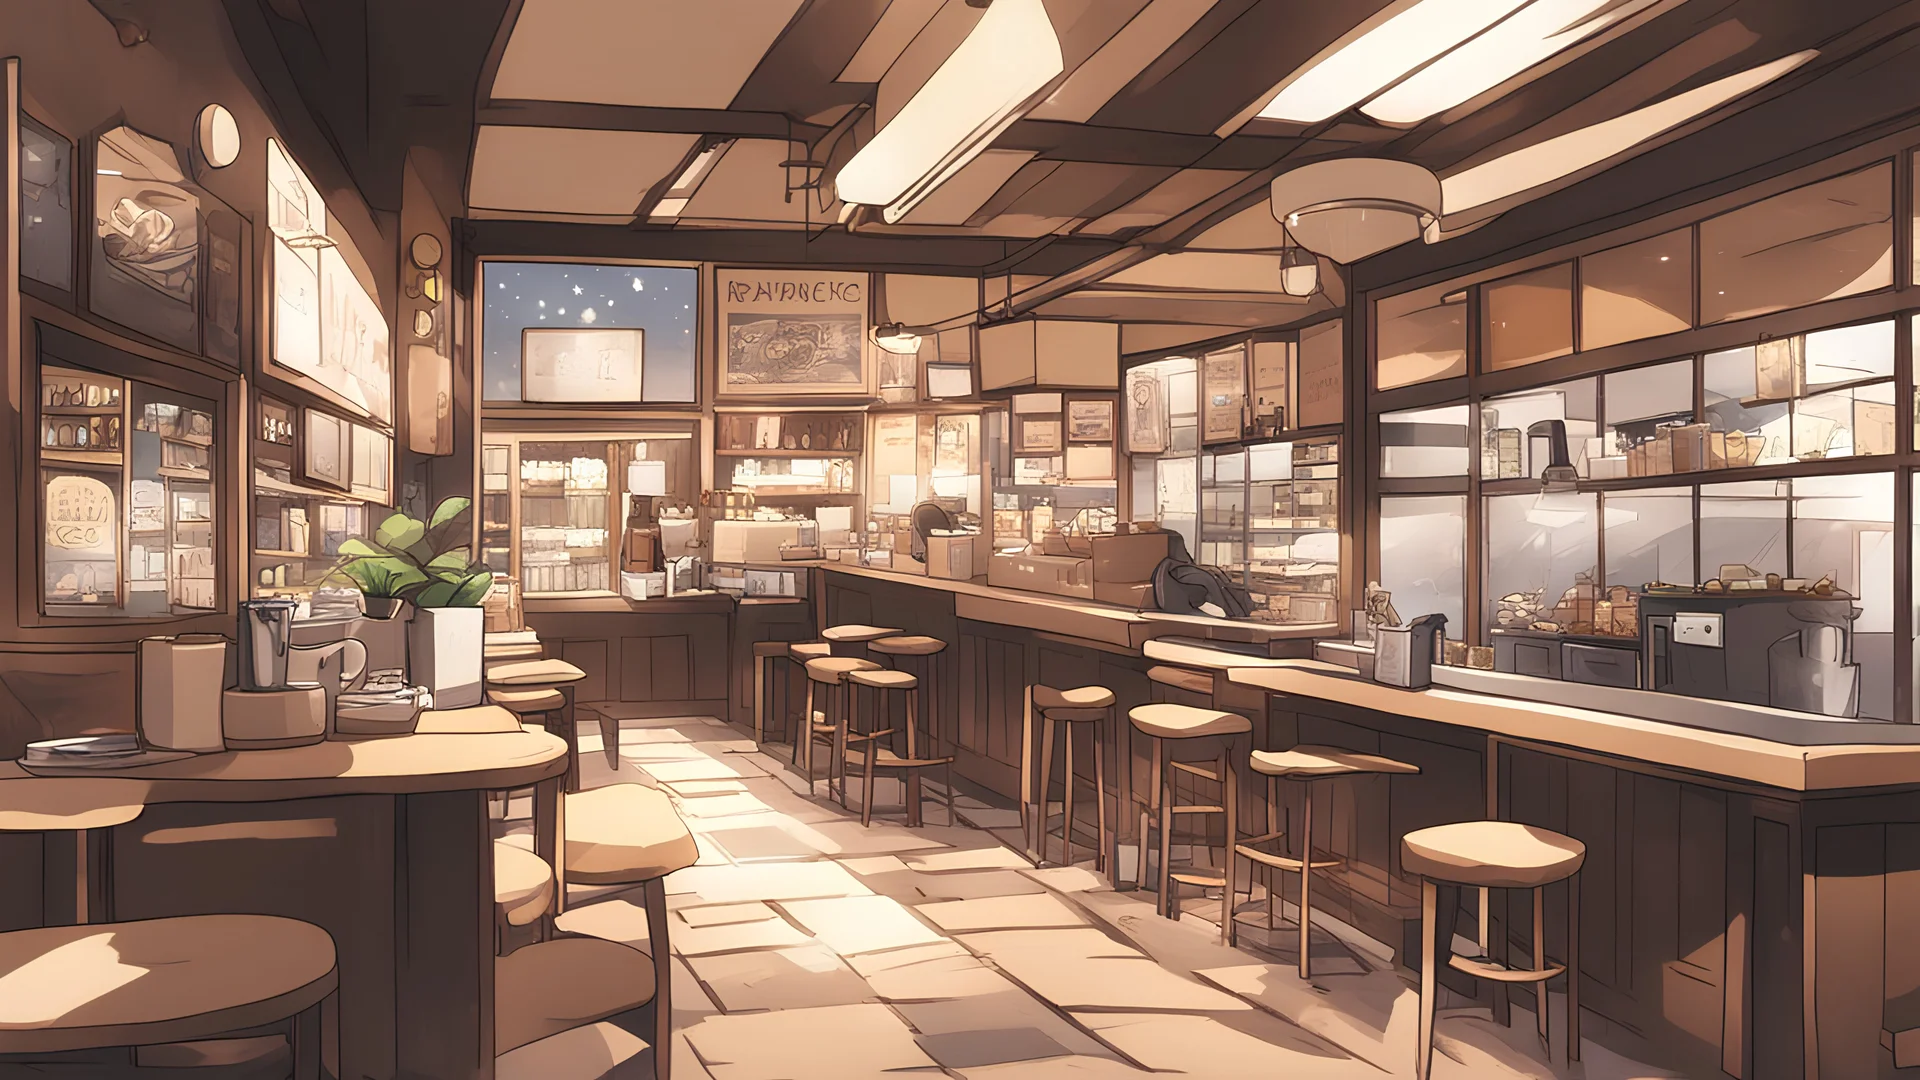 Animated Vtuber Background: Anime Café Coffee Shop Animated Background  Backdrop for Live Video Streaming on Twitch, Youtube and Podcasts - Etsy